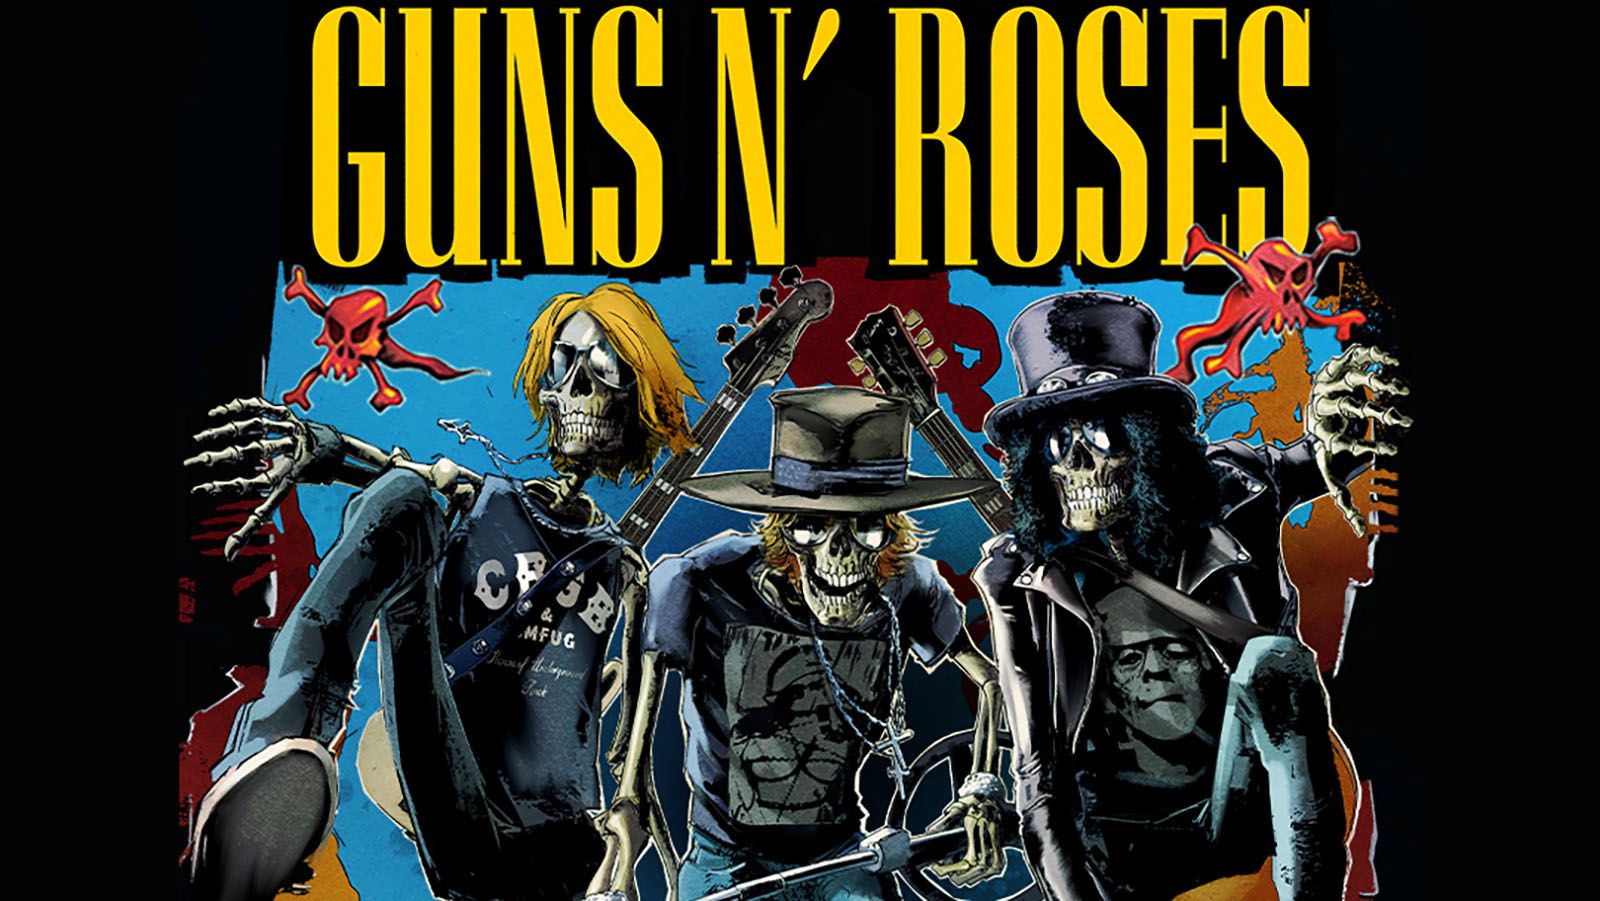 Guns N' Roses will be at Wrigley Field on Aug. 24.